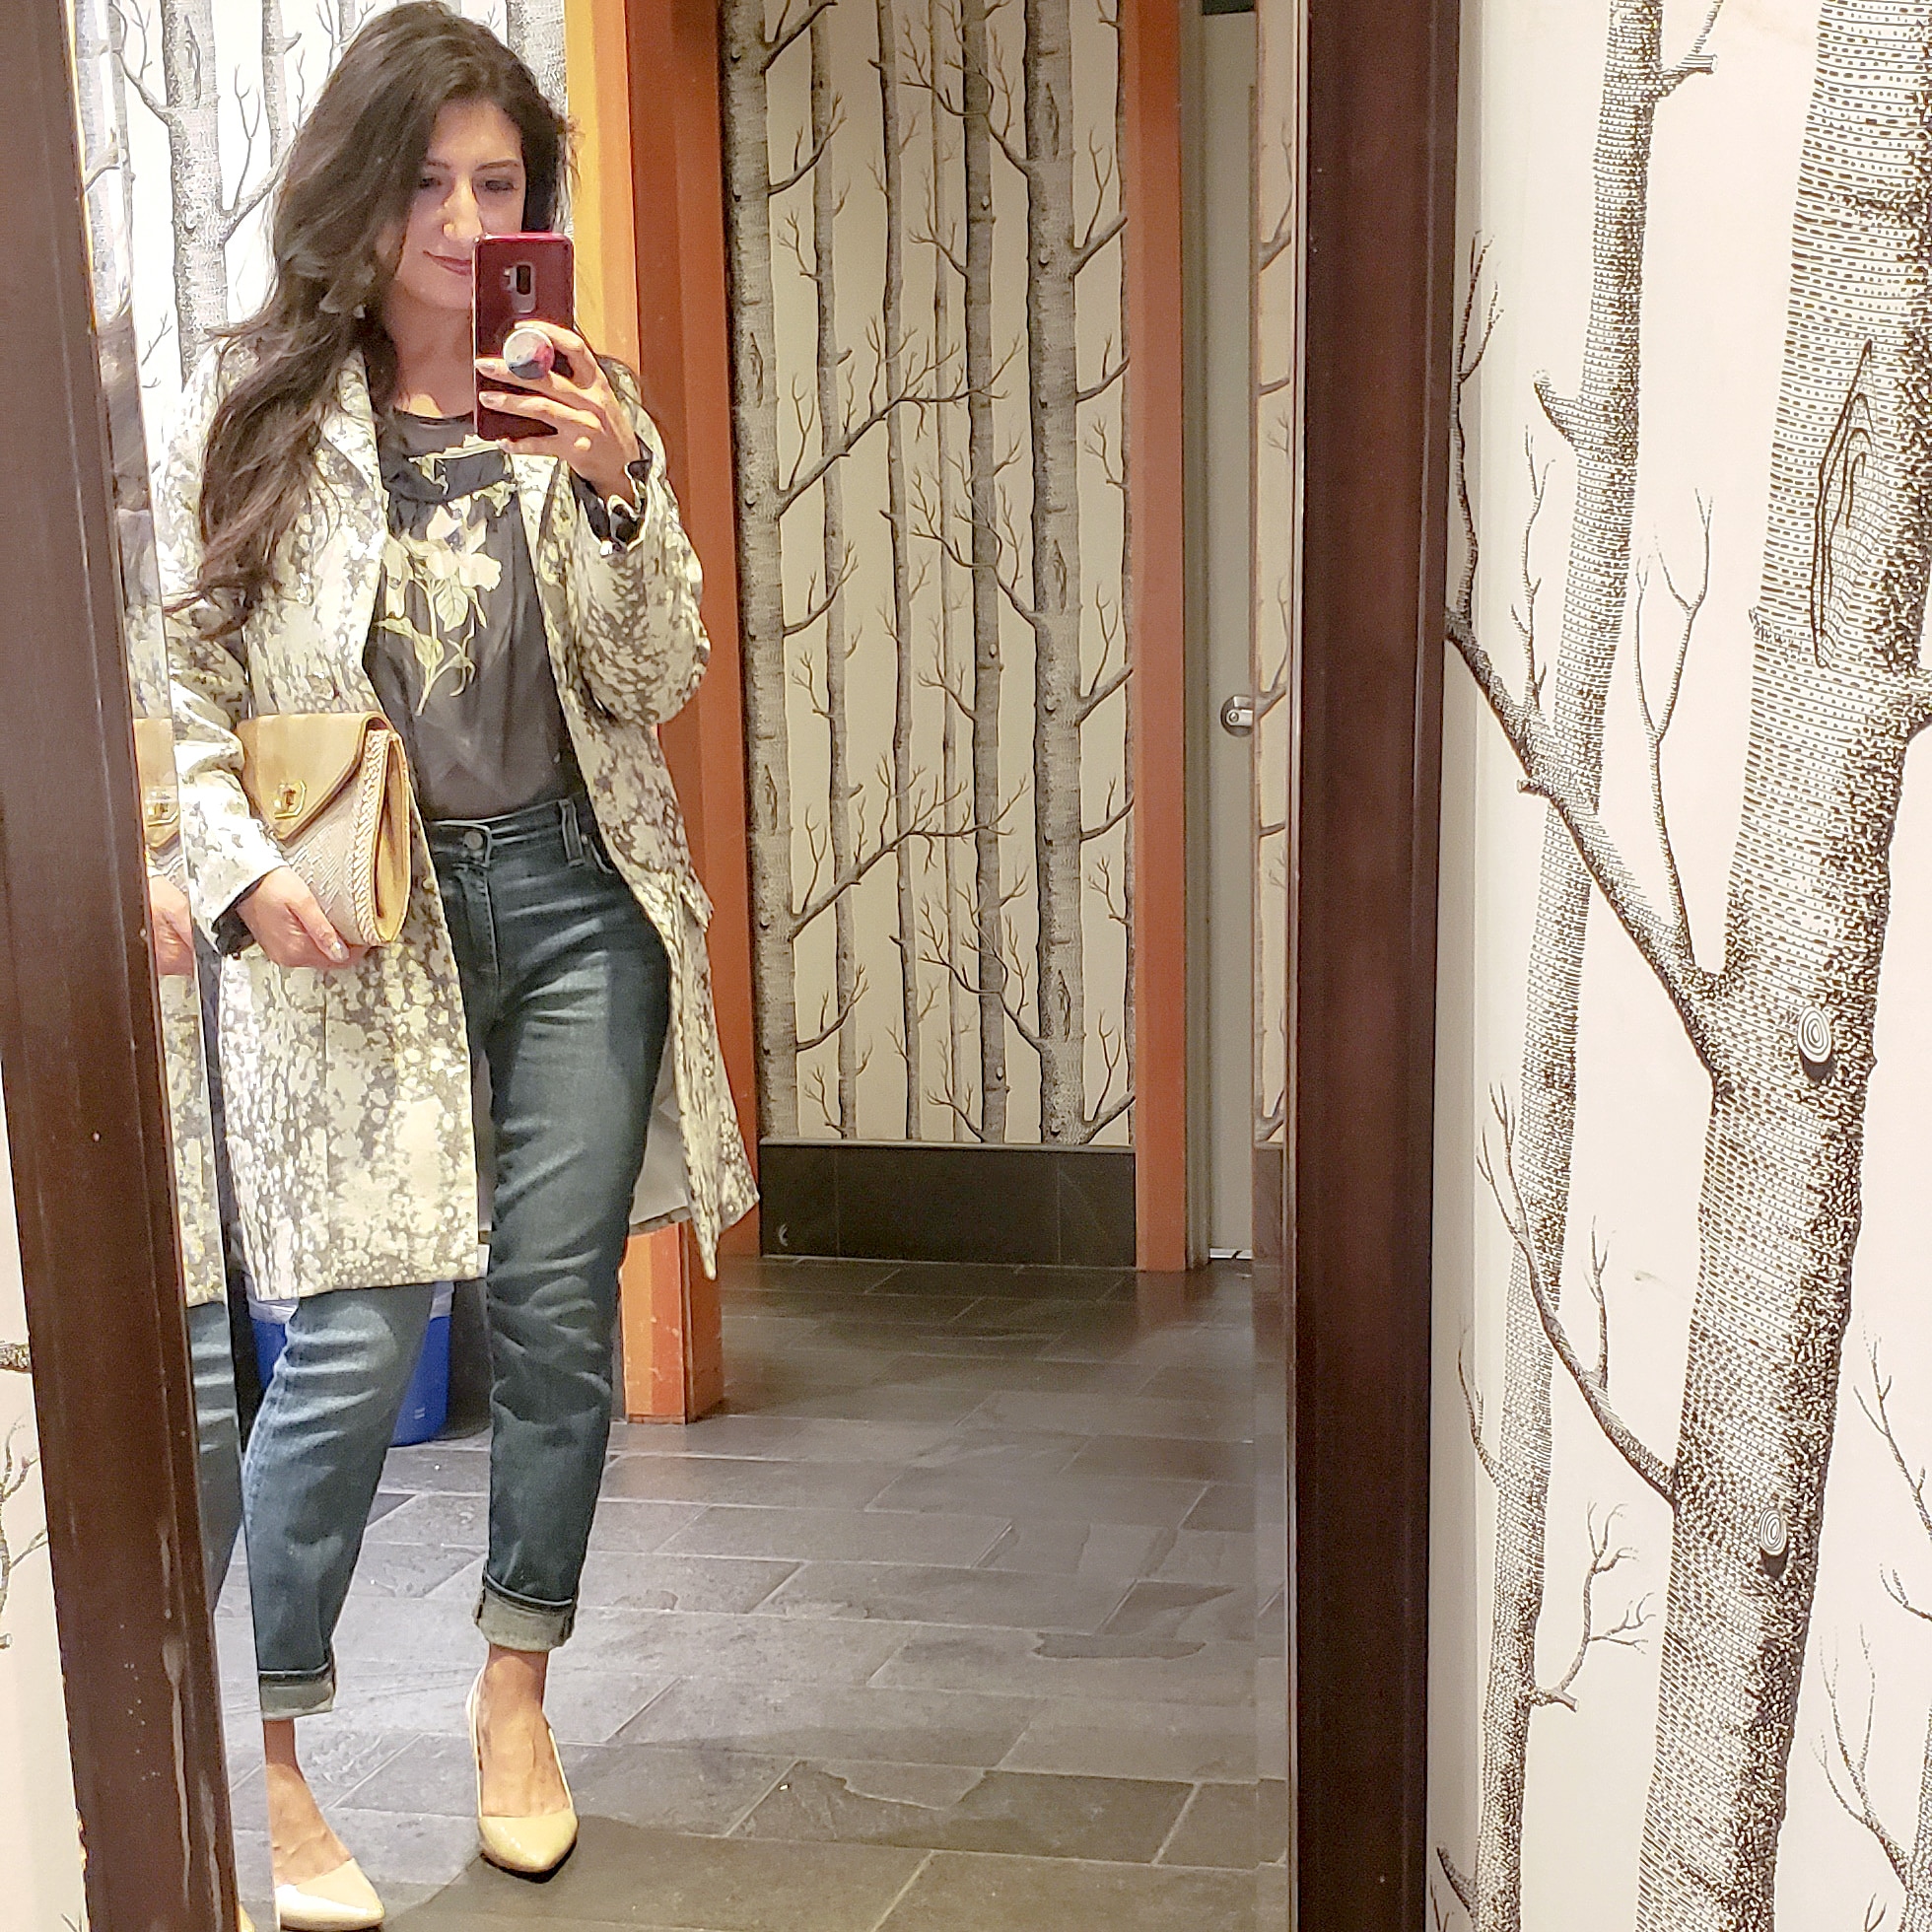 mirror selfie in a floral blouse and rolled up jeans